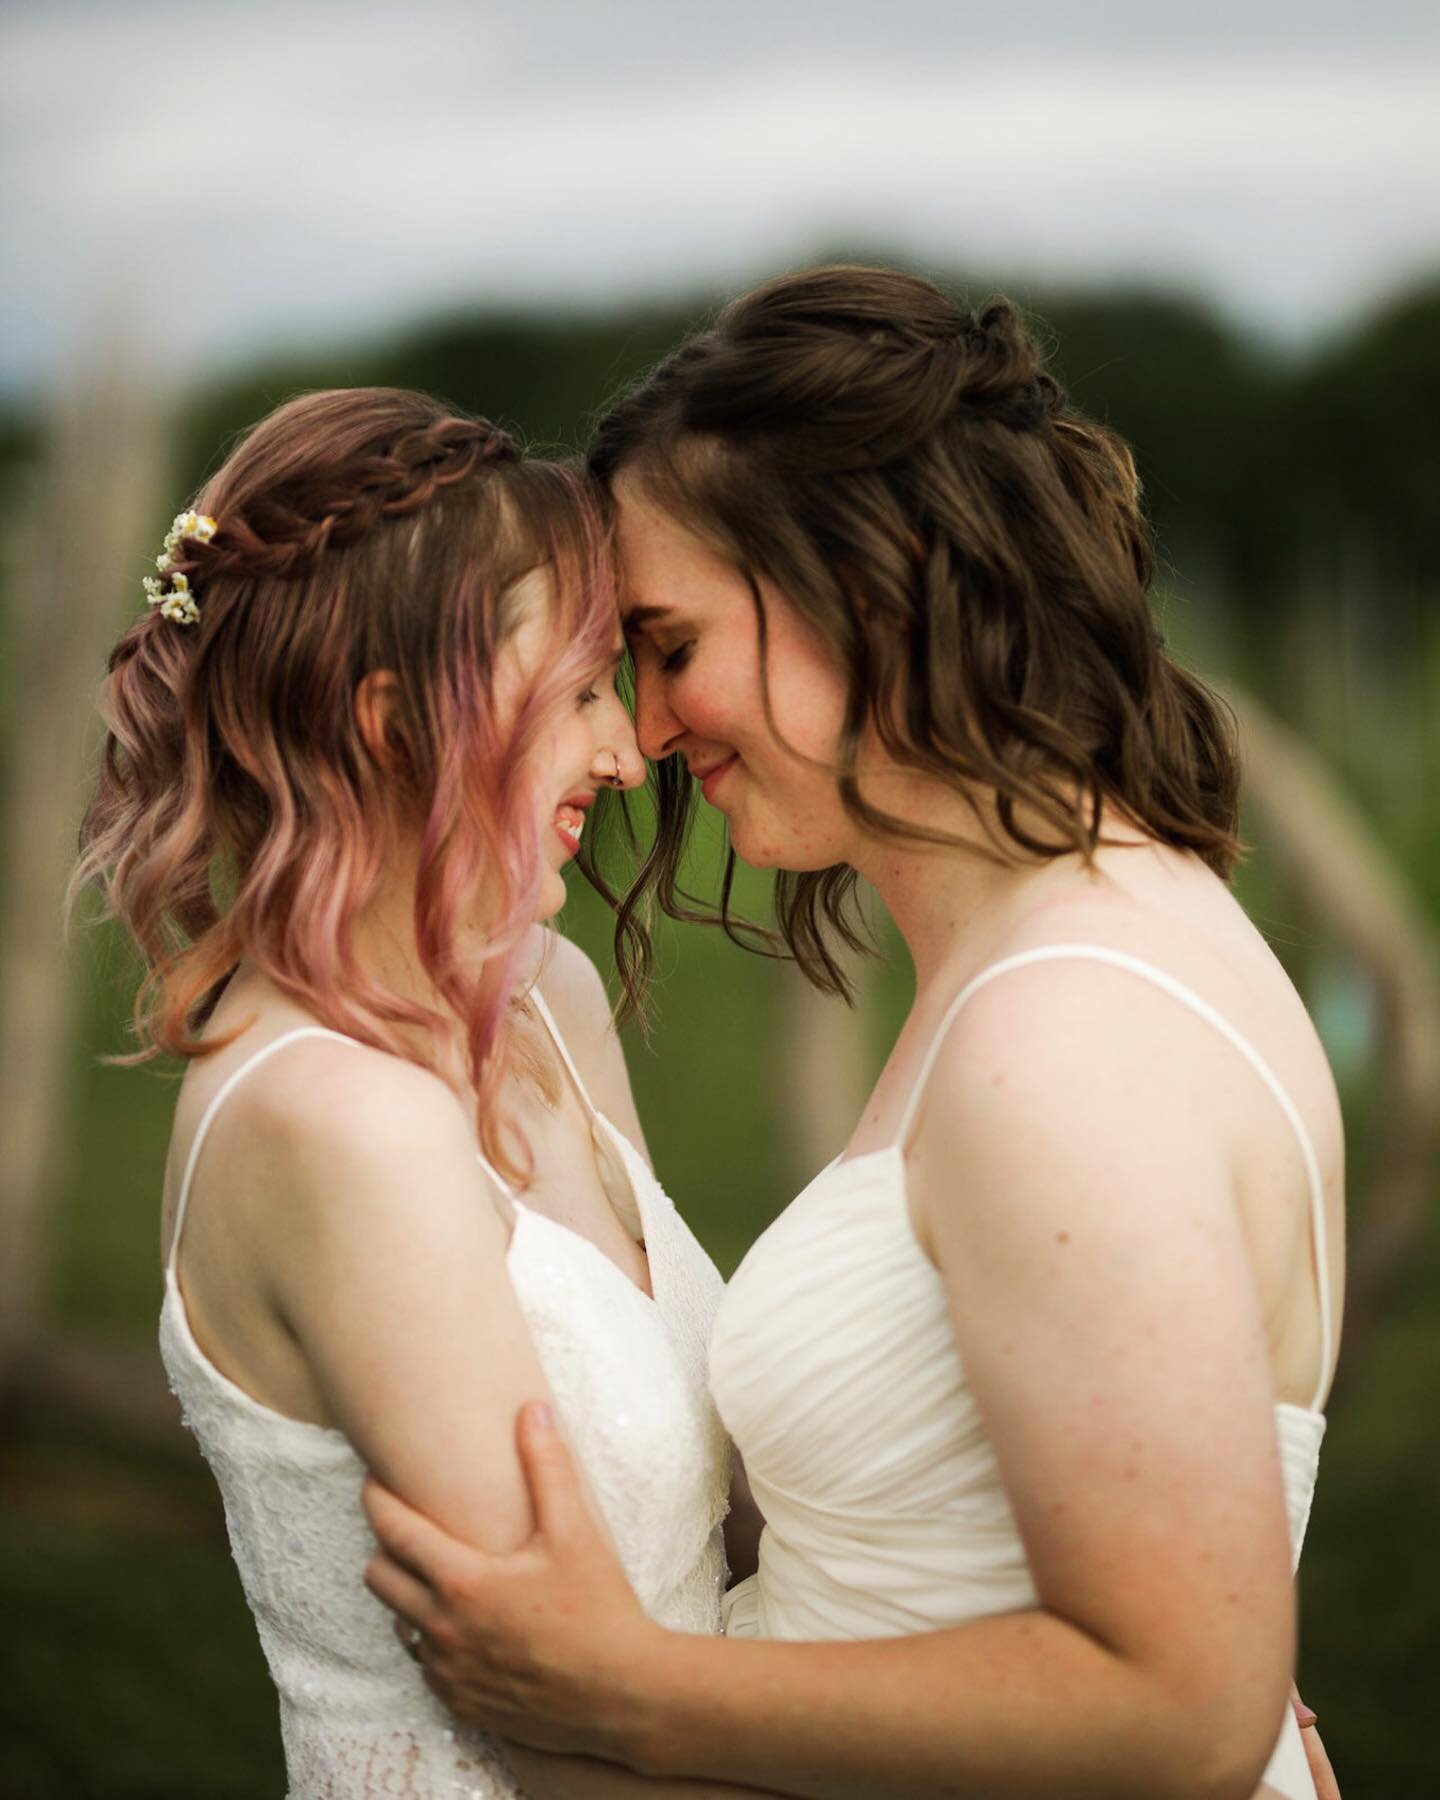 Happy wedding day to Alexa &amp; Brenda 🎉 y&rsquo;all are the sweetest and I&rsquo;m so happy you braved the giant bugs and spiders in the vineyards to capture this perfect moment ❤️

#pridemonth #pridewedding #loveislove #lovewins #queerphotographe